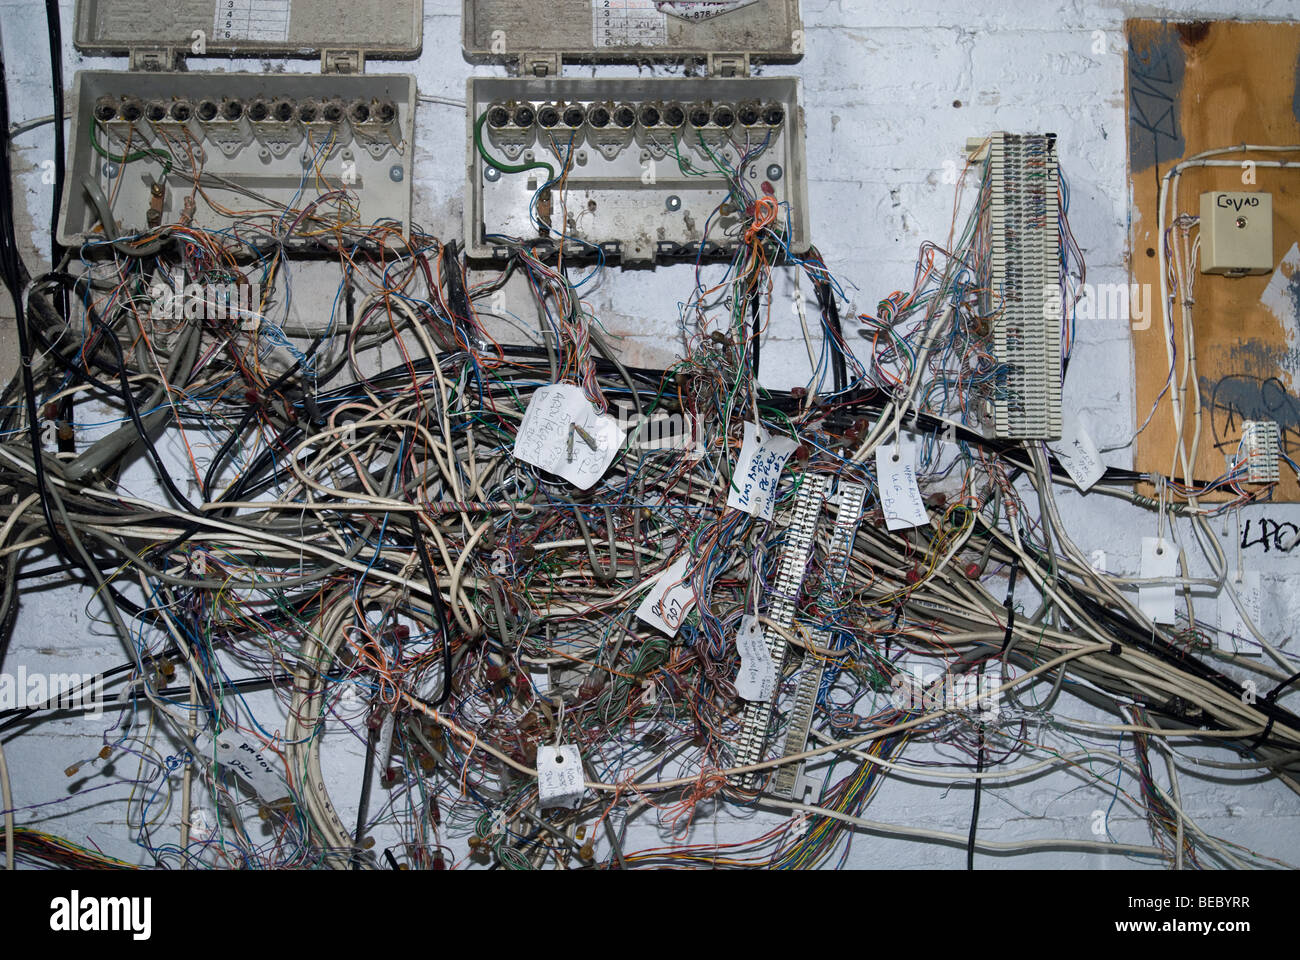 A telephone closet showing a rat's nest of wires and cables Stock Photo